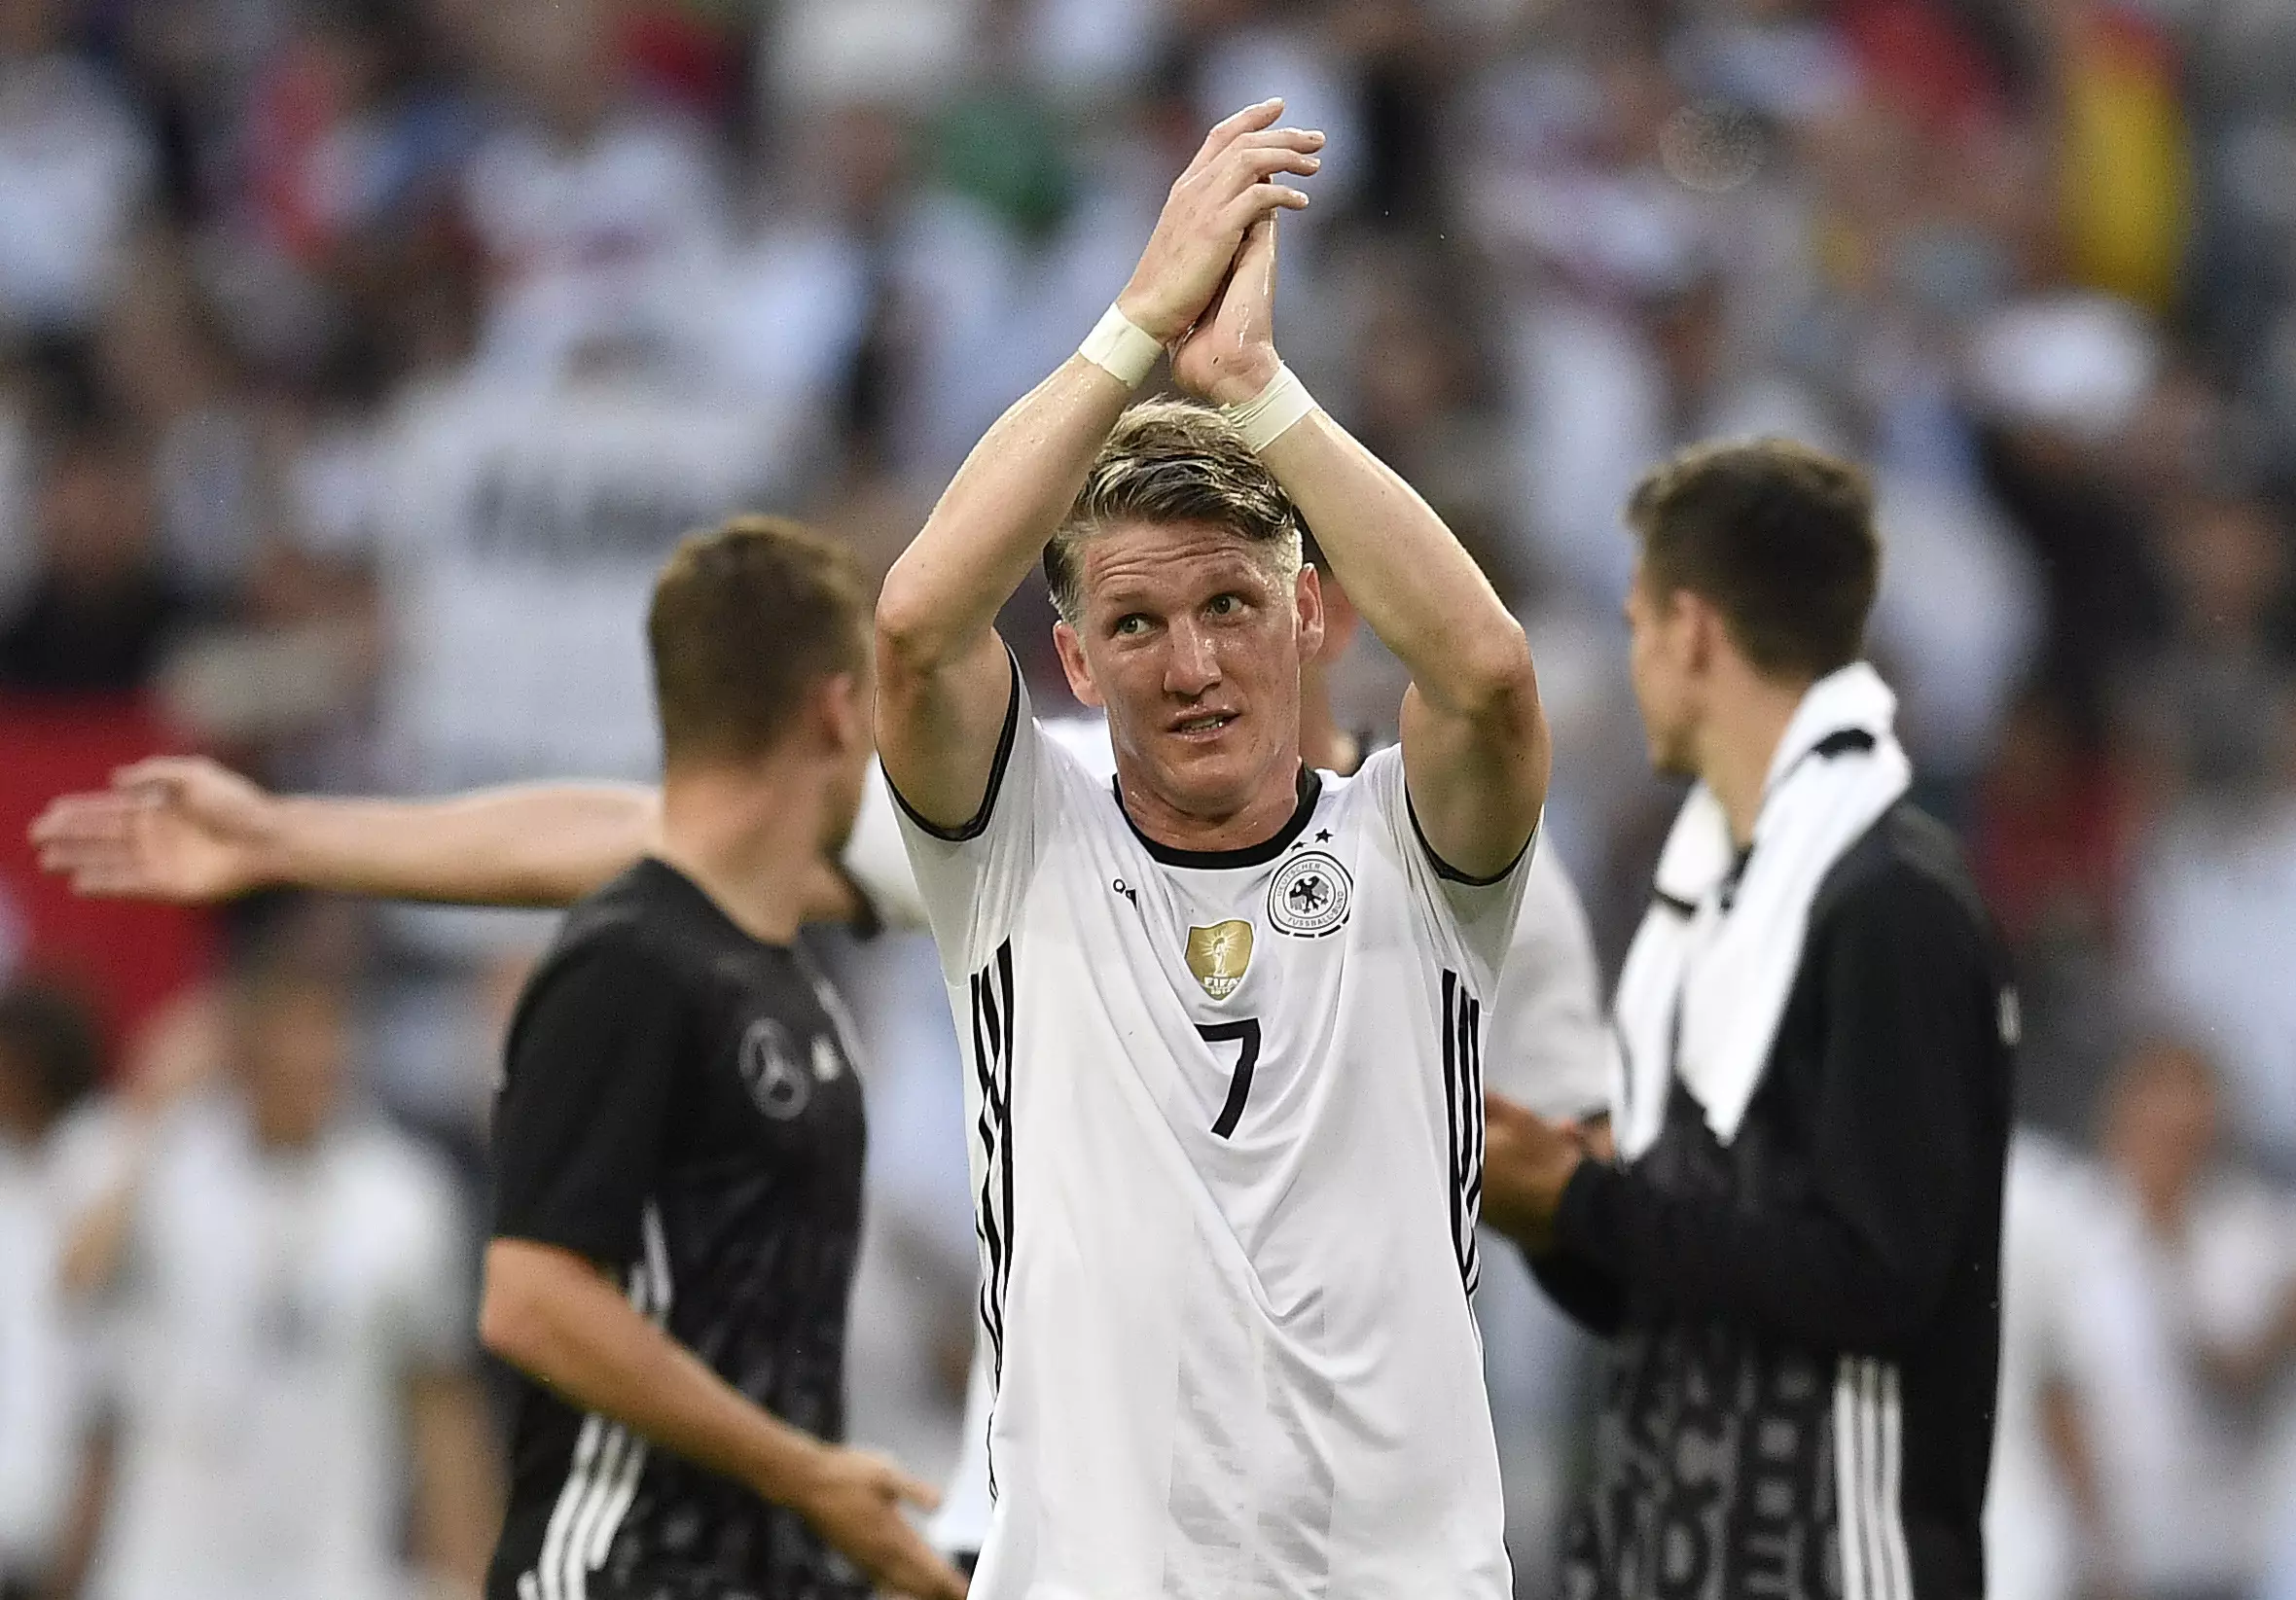 What next for Schweinsteiger? Image: PA Images.